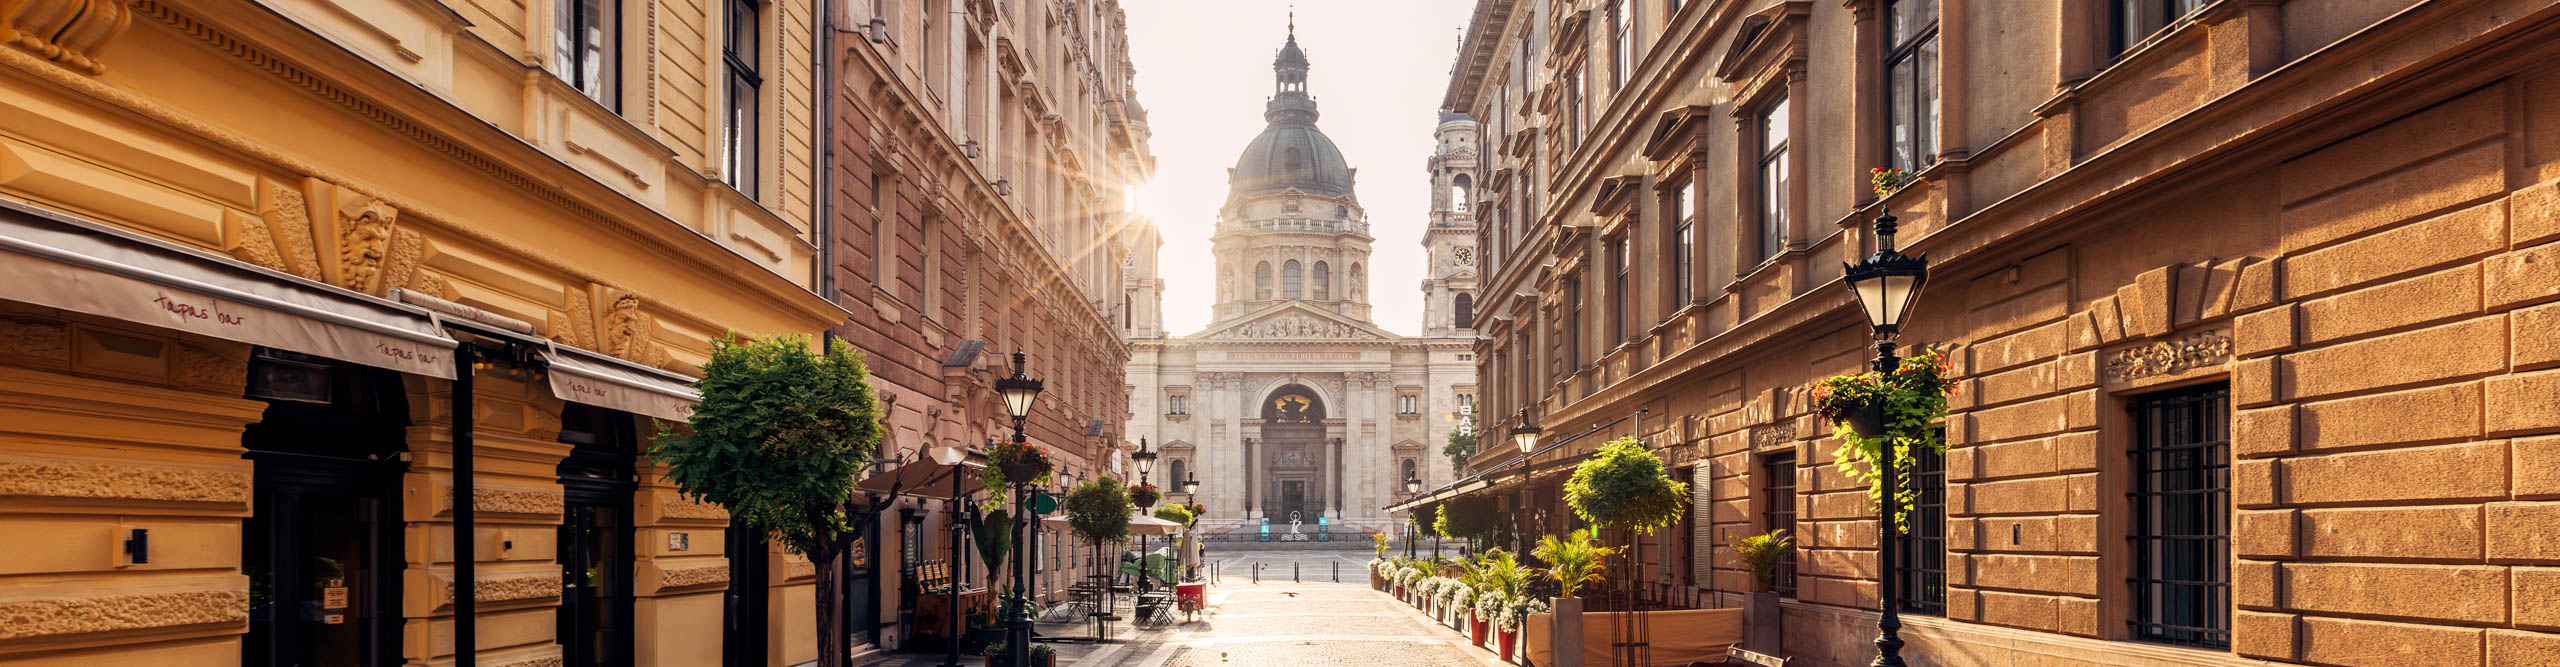 Pedestrian street in Budapest old town leading to St Stephen's Basilica, with sun setting behind 